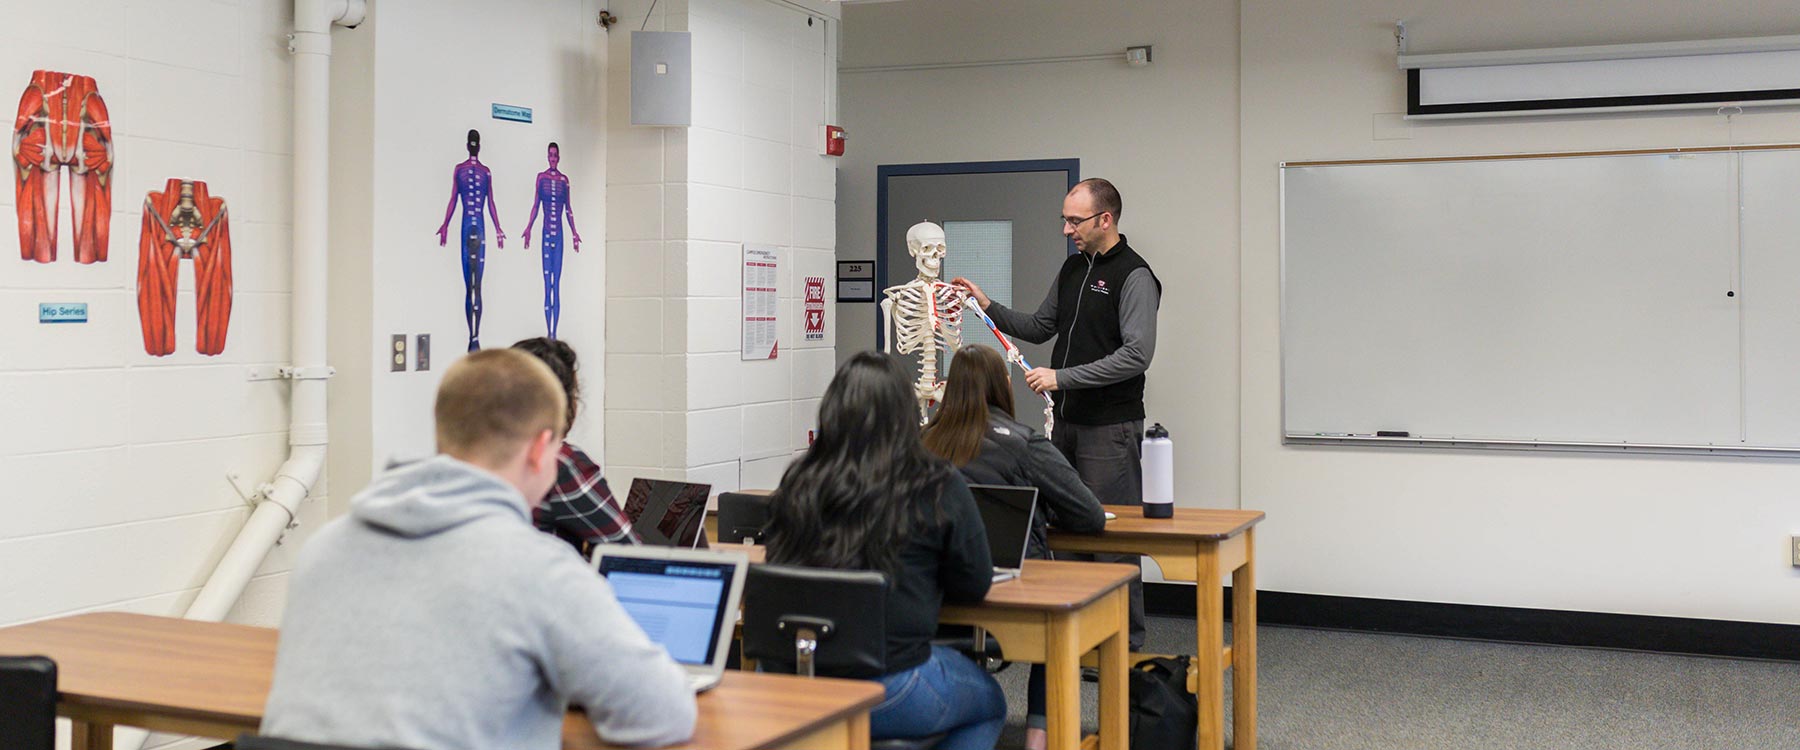 Instructor teaching anatomy using a skeleton model to a class of students in a classroom.